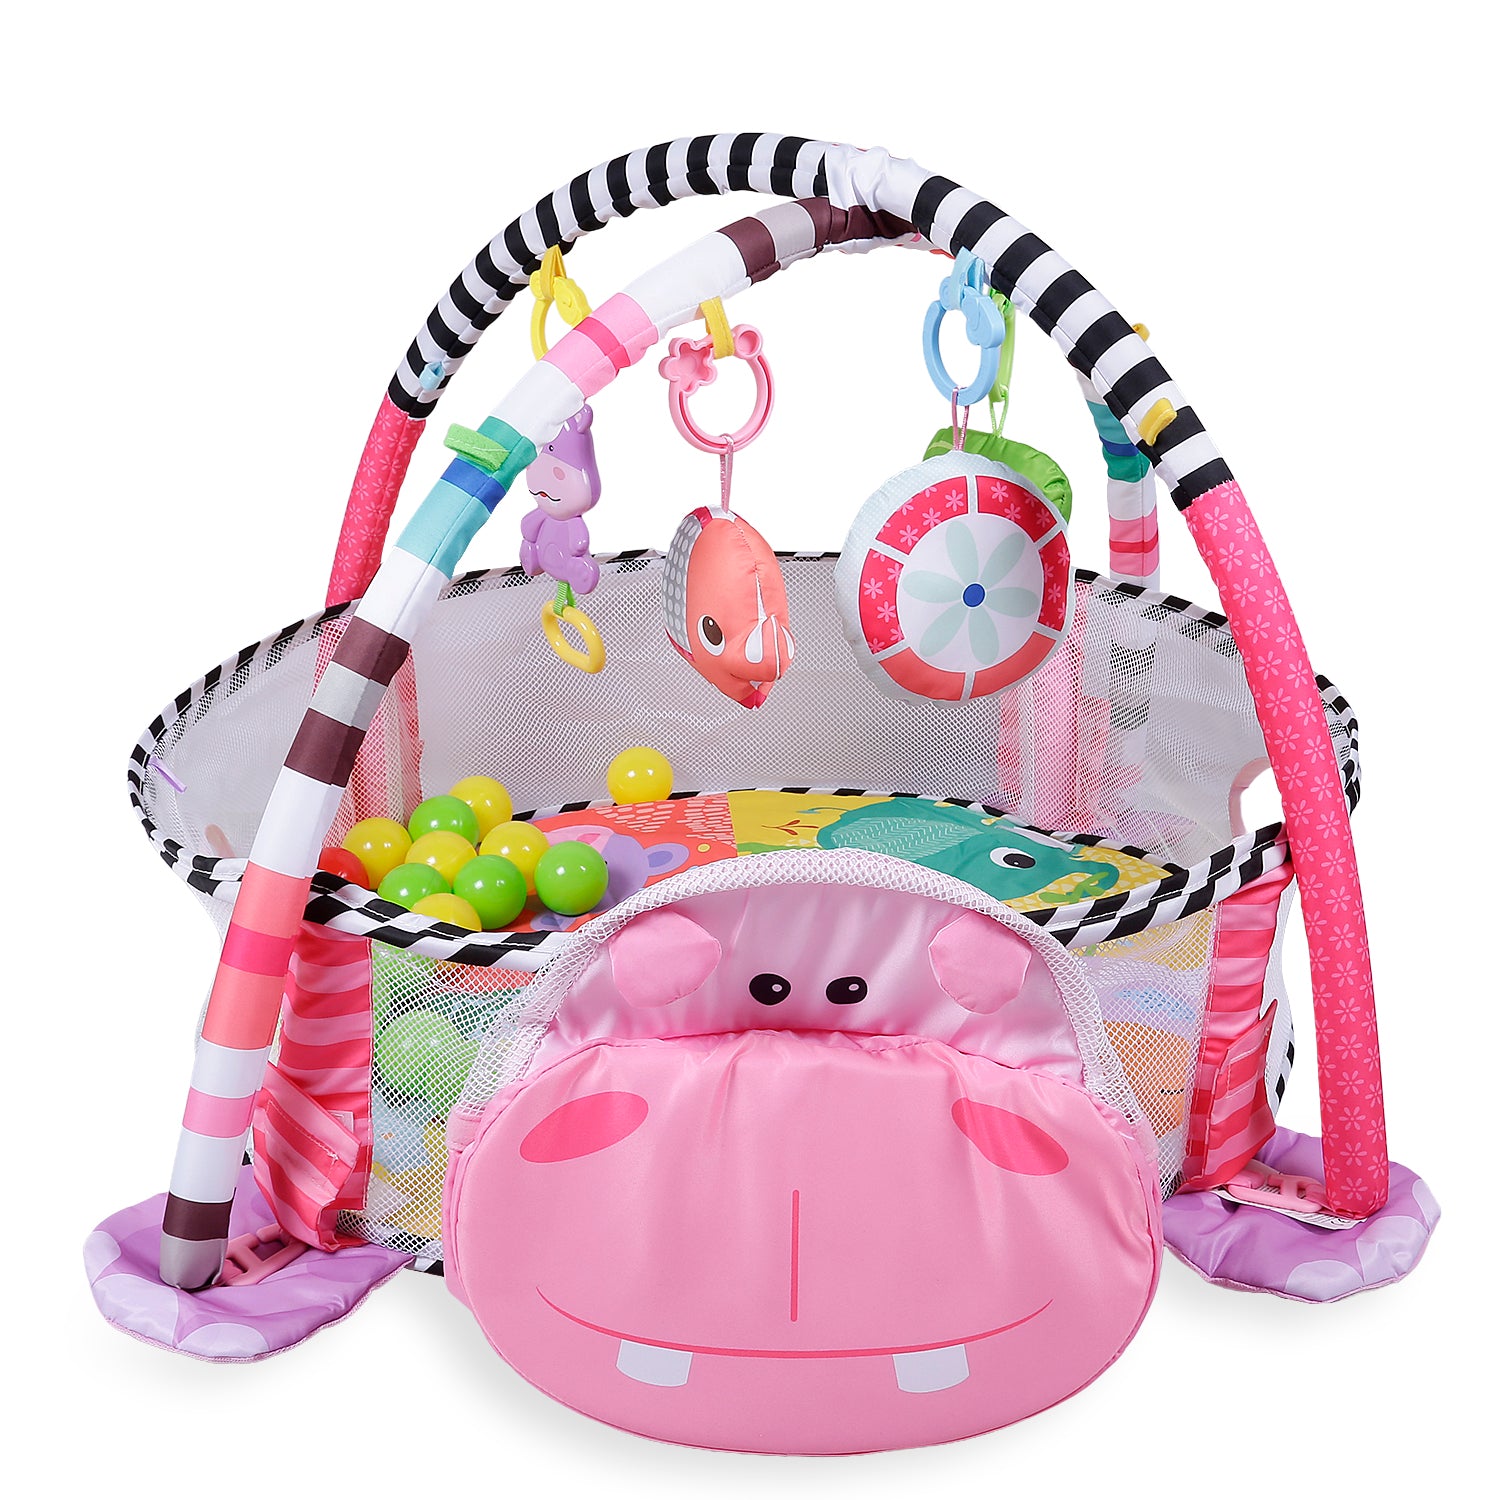 Baby Moo Hippo Infant Play Mat Activity Gym With Hanging Toys And Balls - Pink